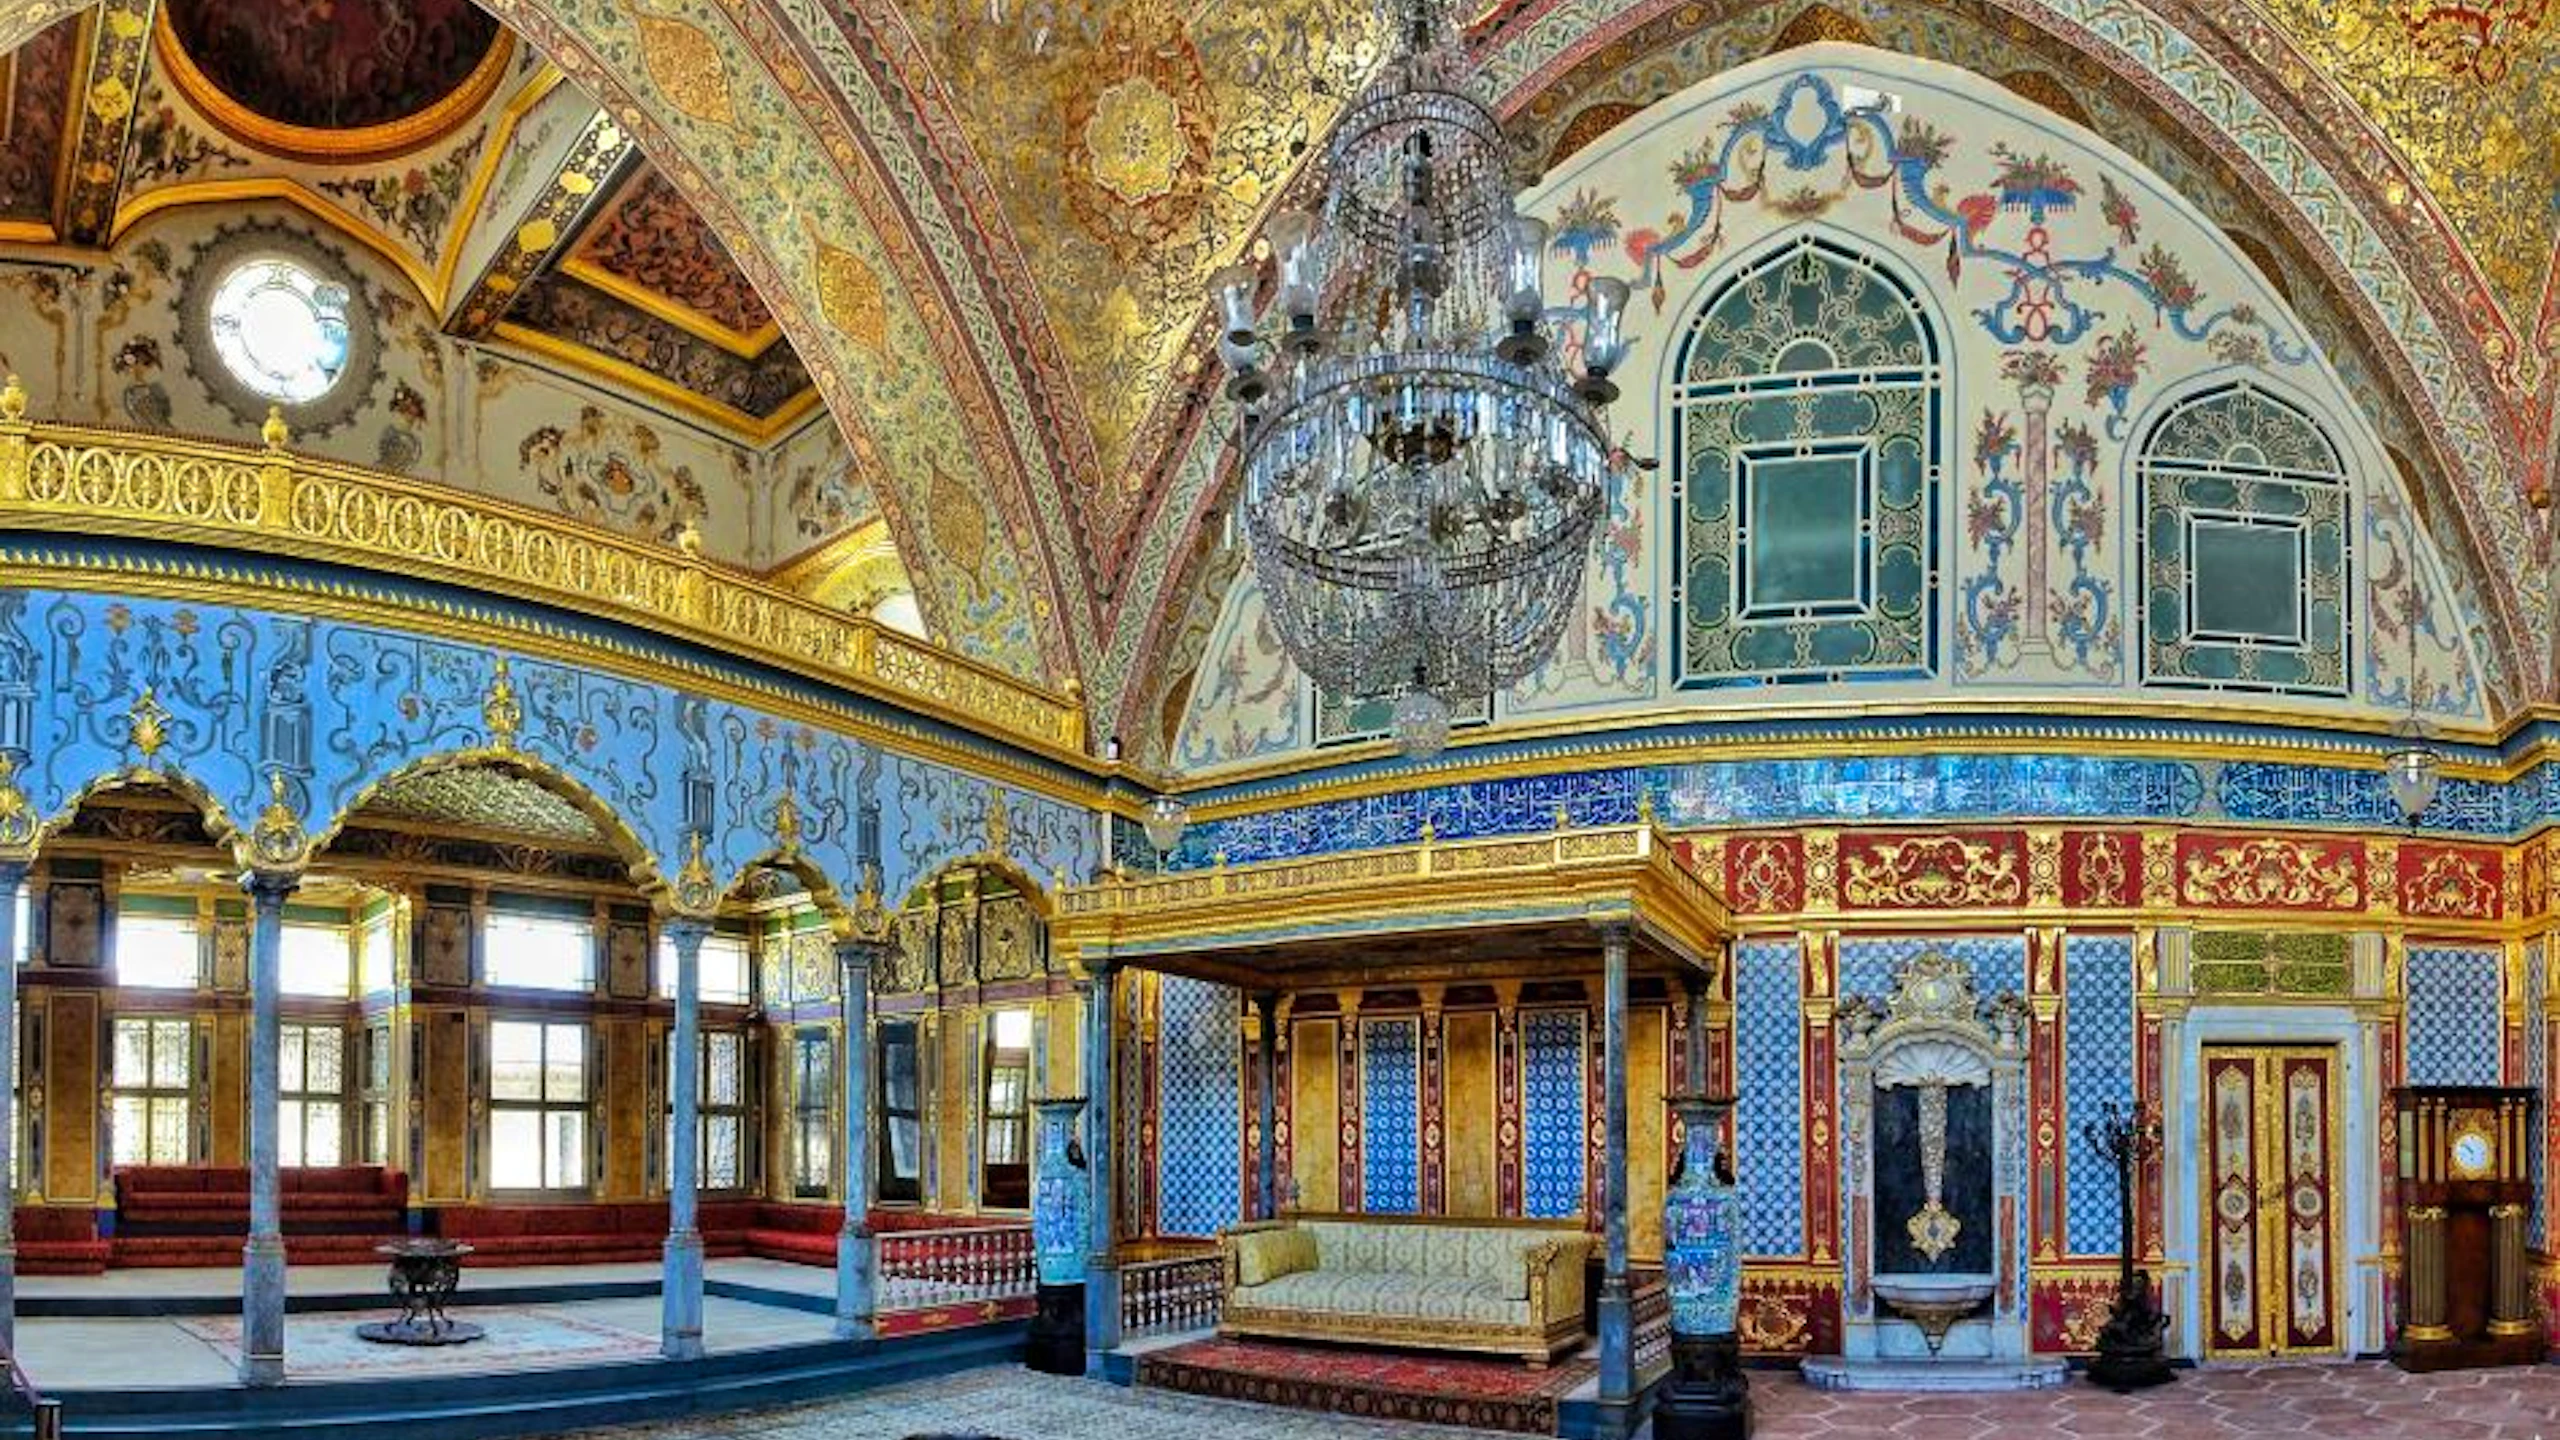 Byzantine and Ottoman Relics Tour & Topkapı Palace with ticket & Lunch: Istanbul Ticket